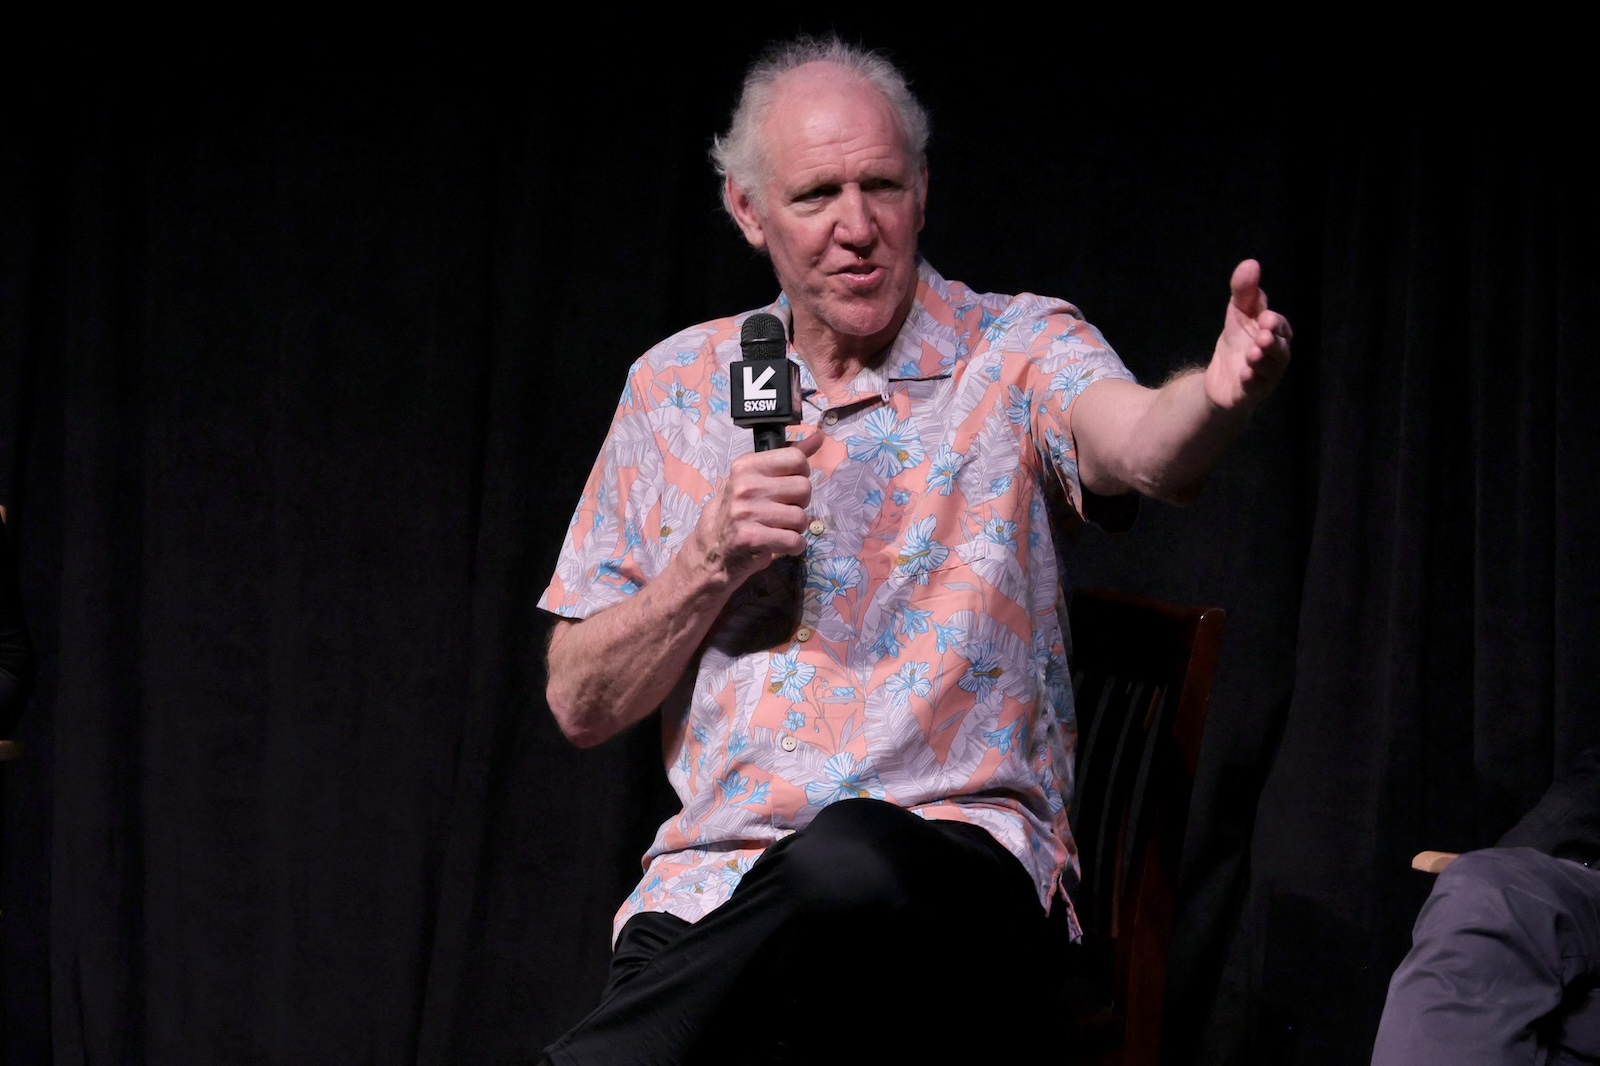 AUSTIN, TEXAS - MARCH 15: Bill Walton takes part in a Q&A following "The Luckiest Guy in the World" world premiere during 2023 SXSW Conference and Festivals at Austin Convention Center on March 15, 2023 in Austin, Texas.   Michael Loccisano,Image: 763036309, License: Rights-managed, Restrictions: , Model Release: no, Credit line: Michael loccisano / Getty images / Profimedia